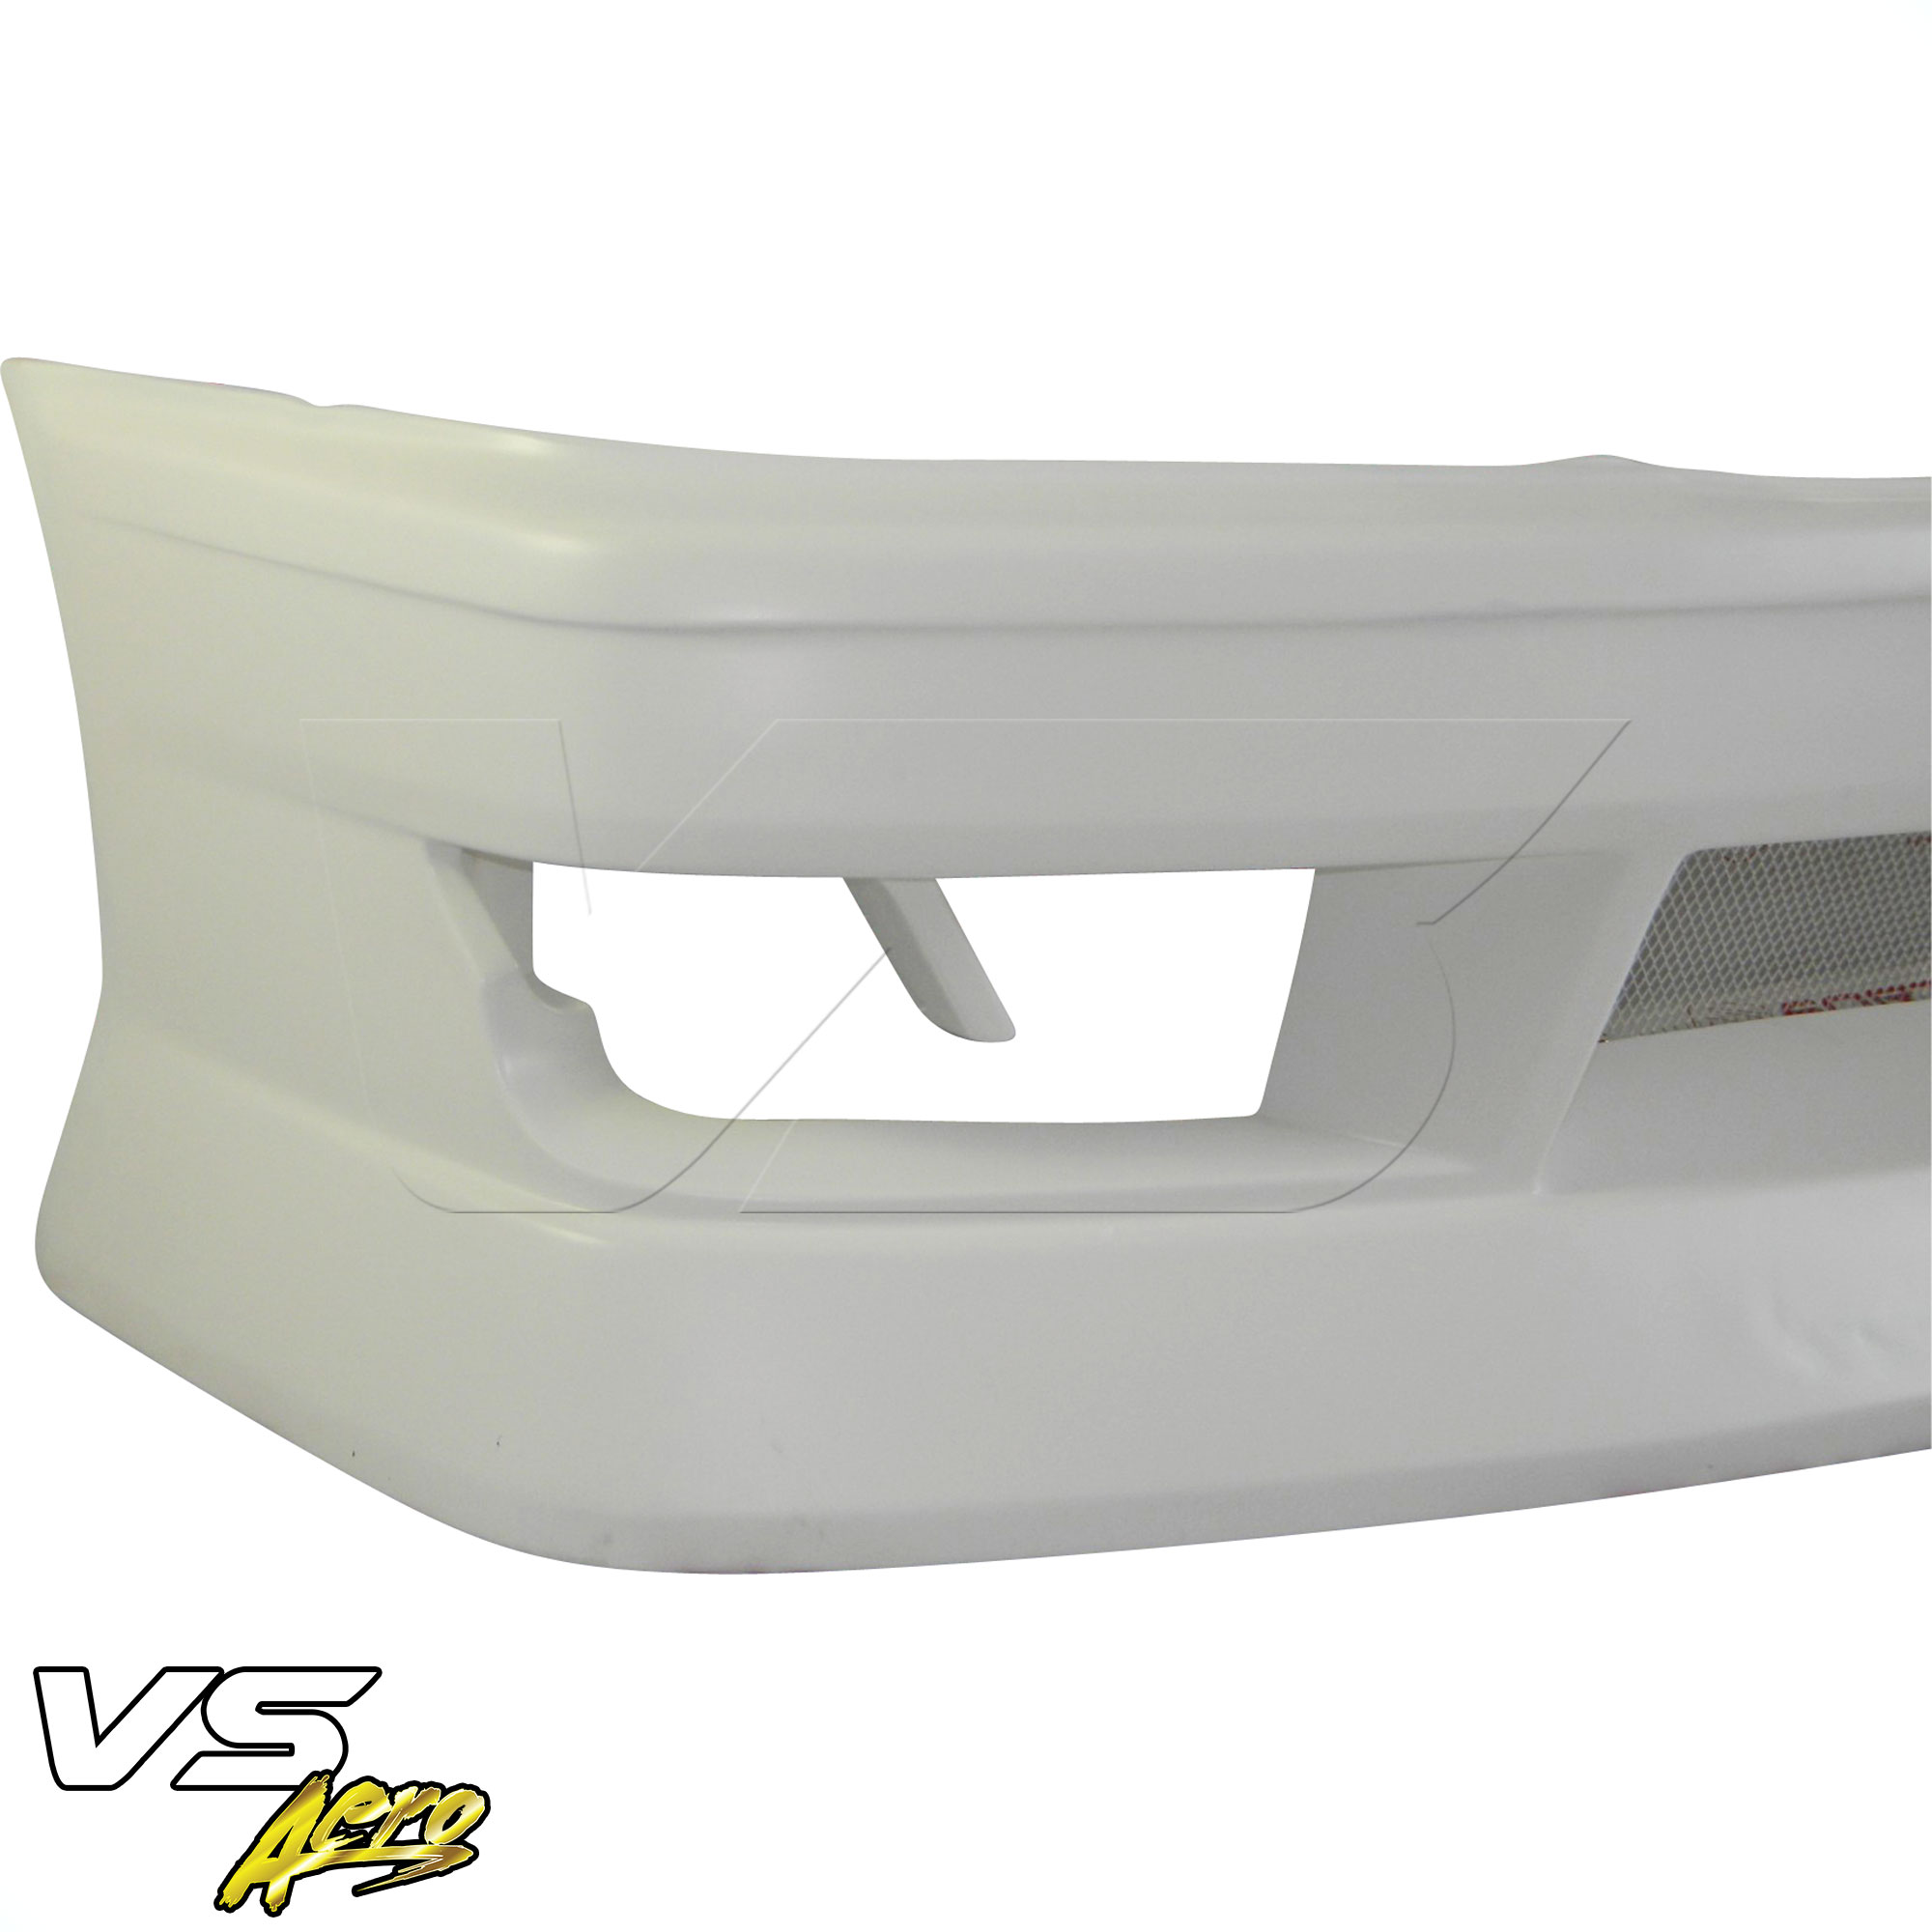 VSaero FRP BSPO Front Bumper > Toyota Chaser JZX100 1996-2000 - Image 12